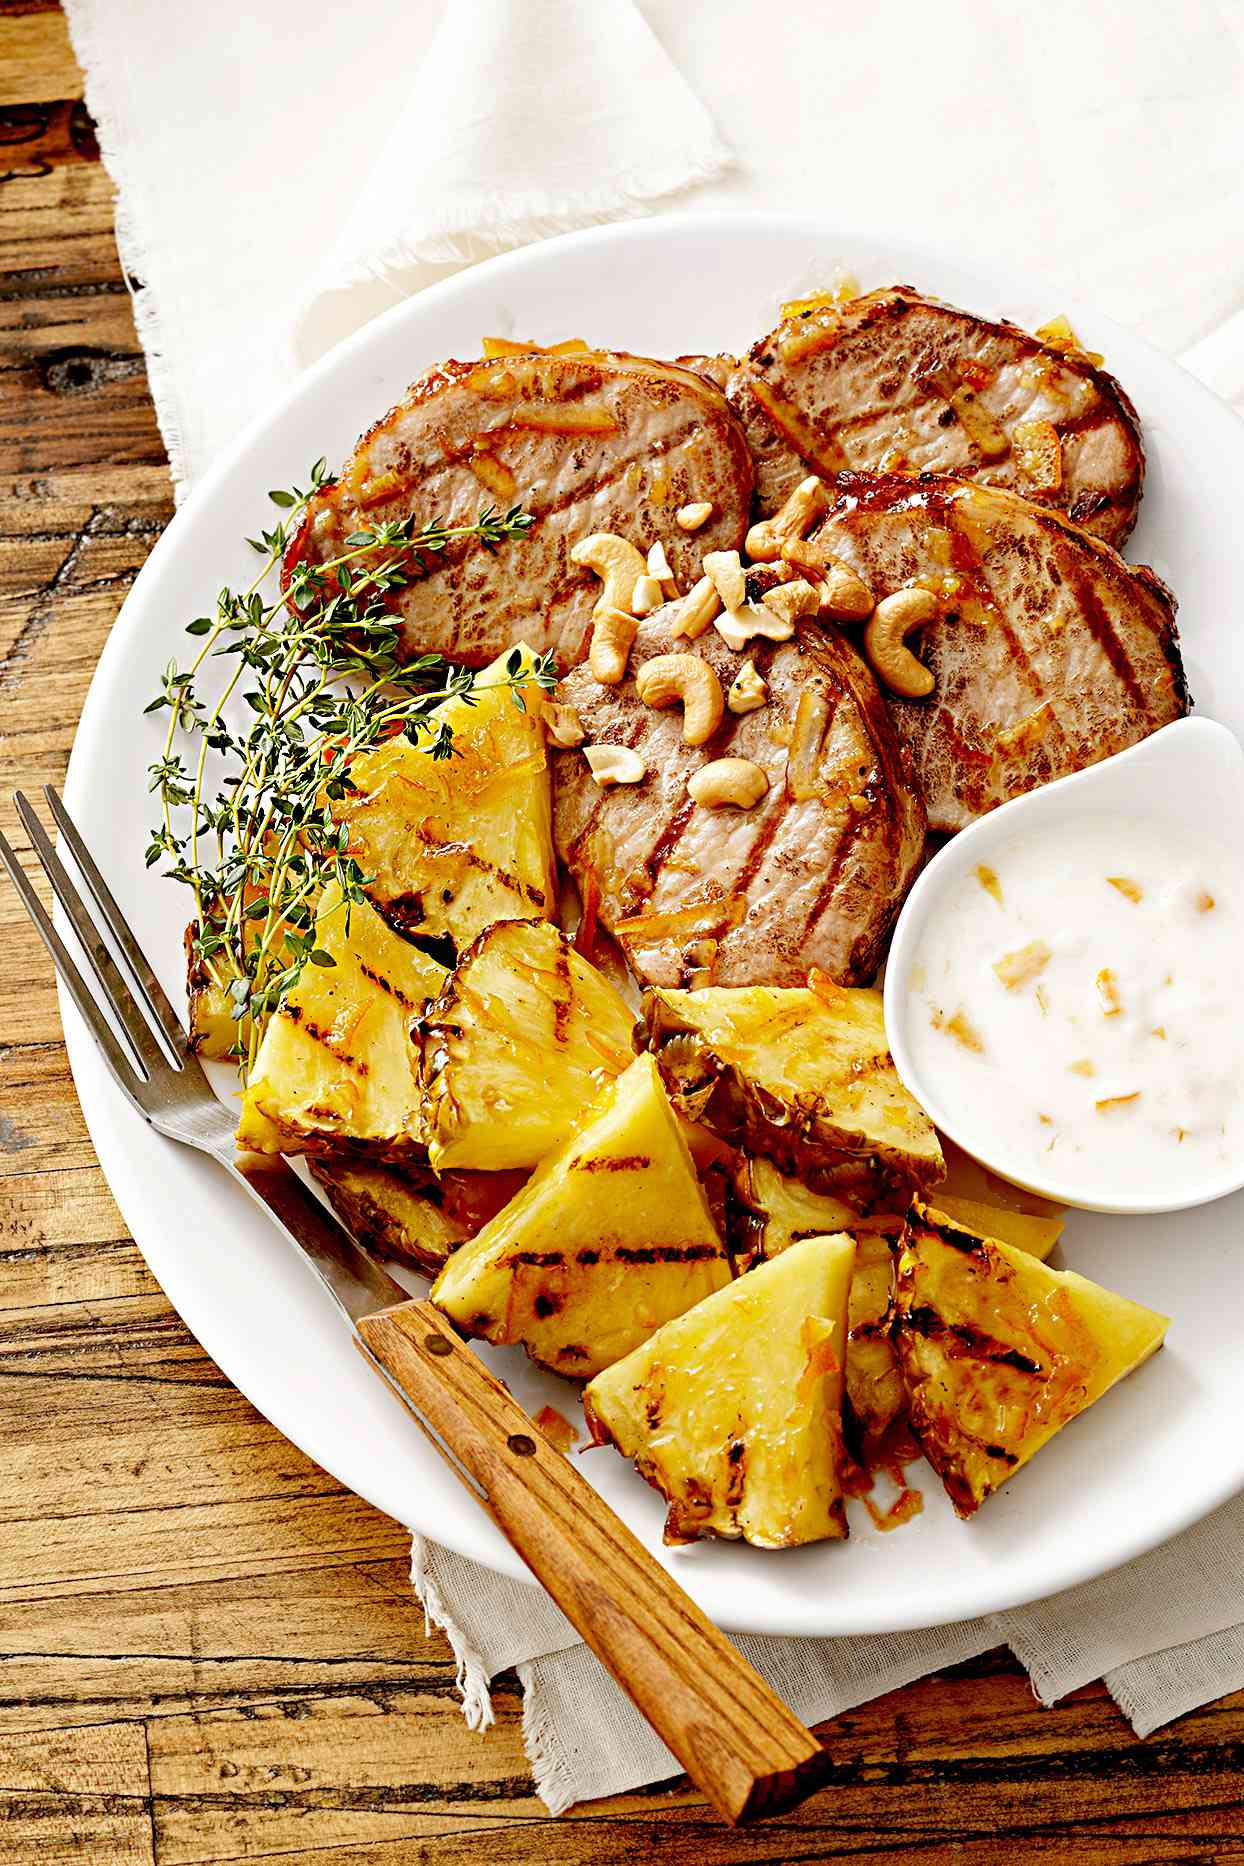 Grilled Pork and Pineapple 